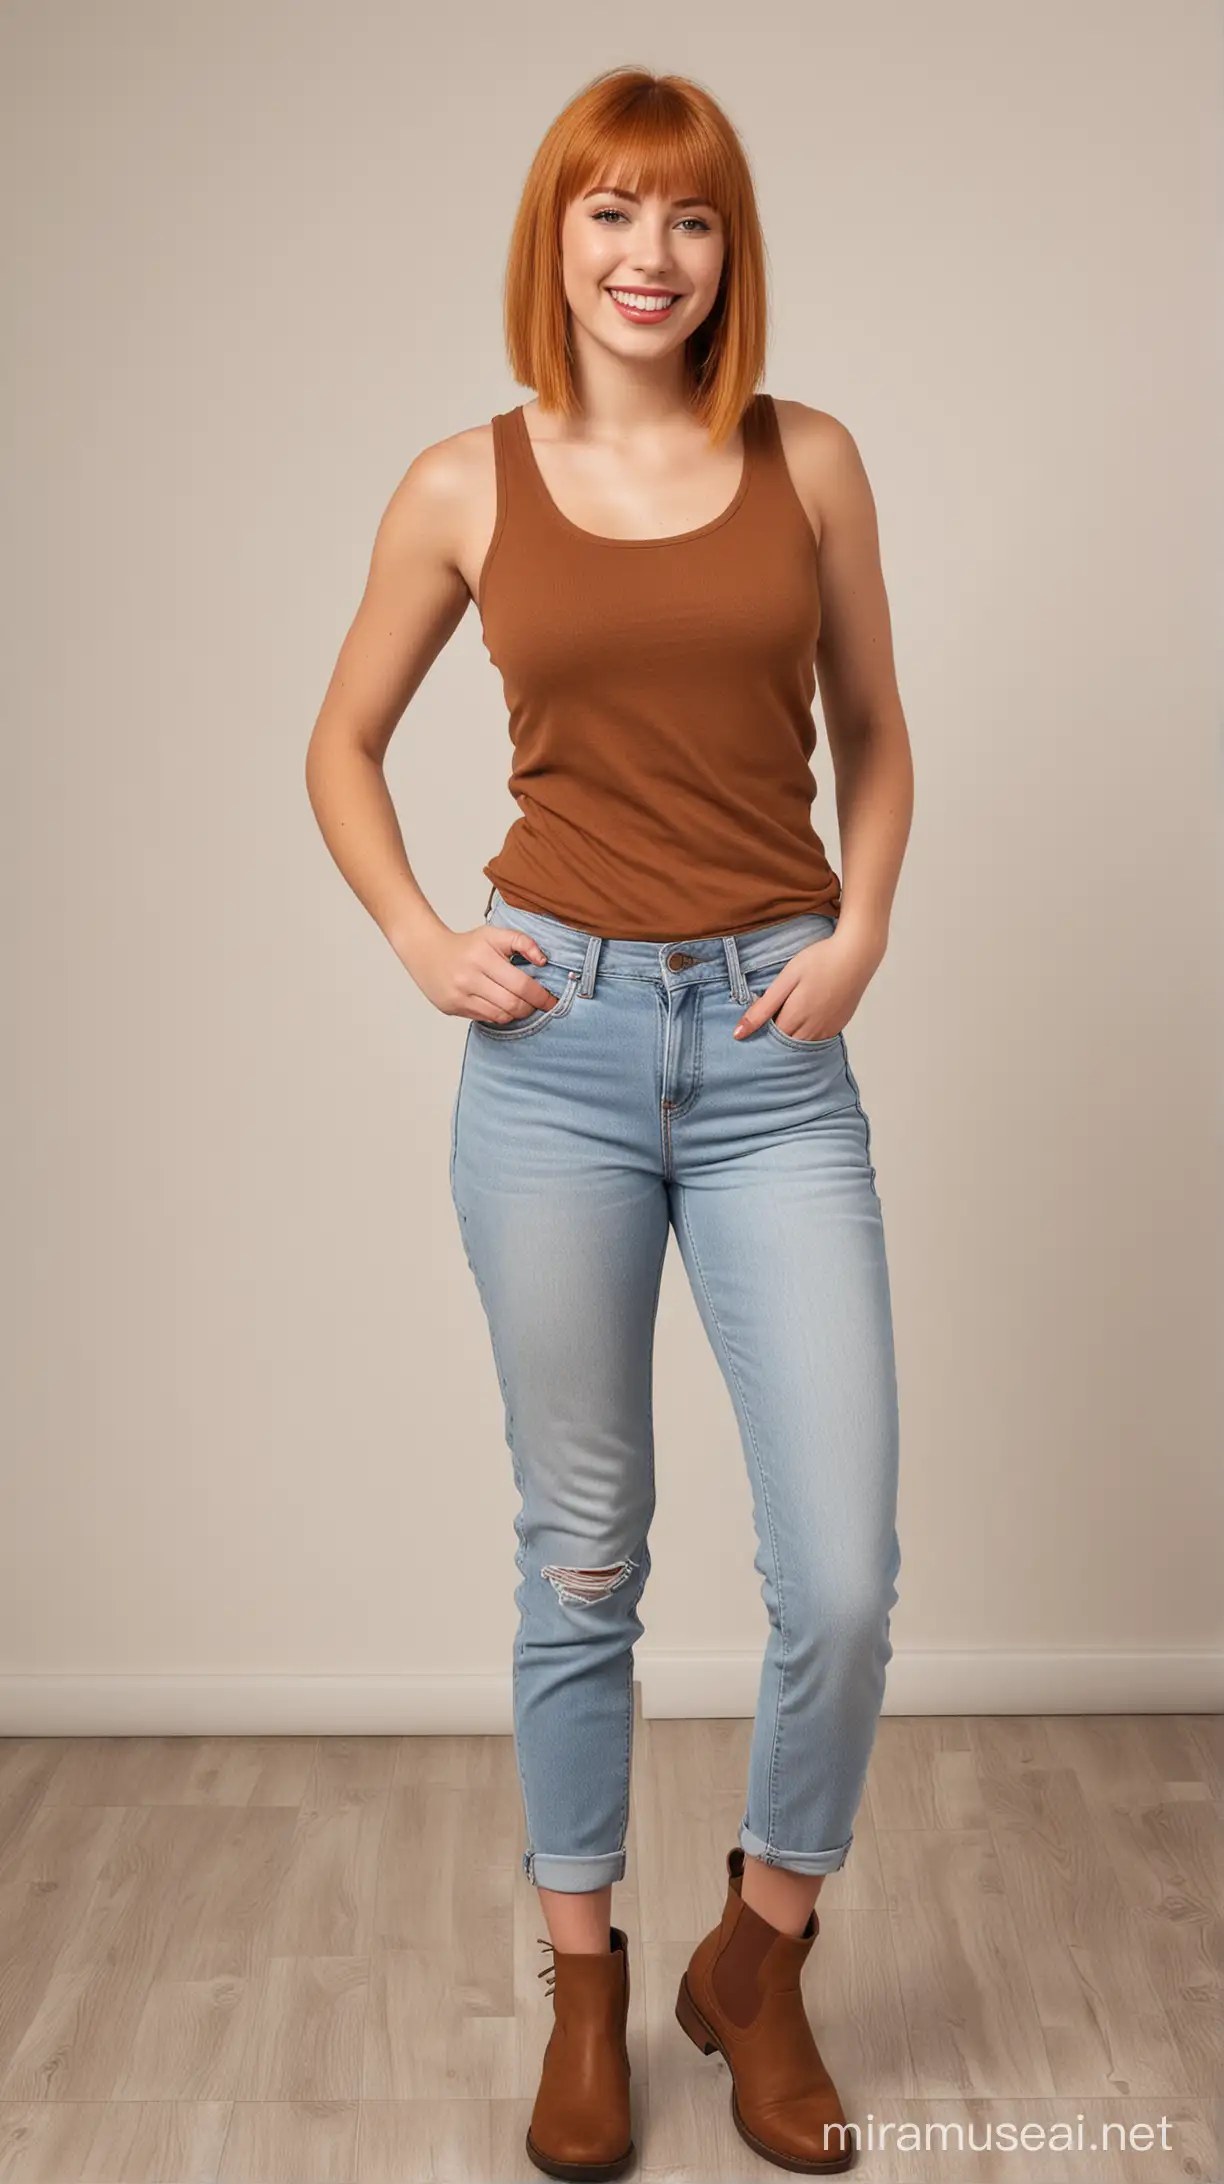 Young Woman with Orange Hair in Casual White Tank Top and Black Jeans